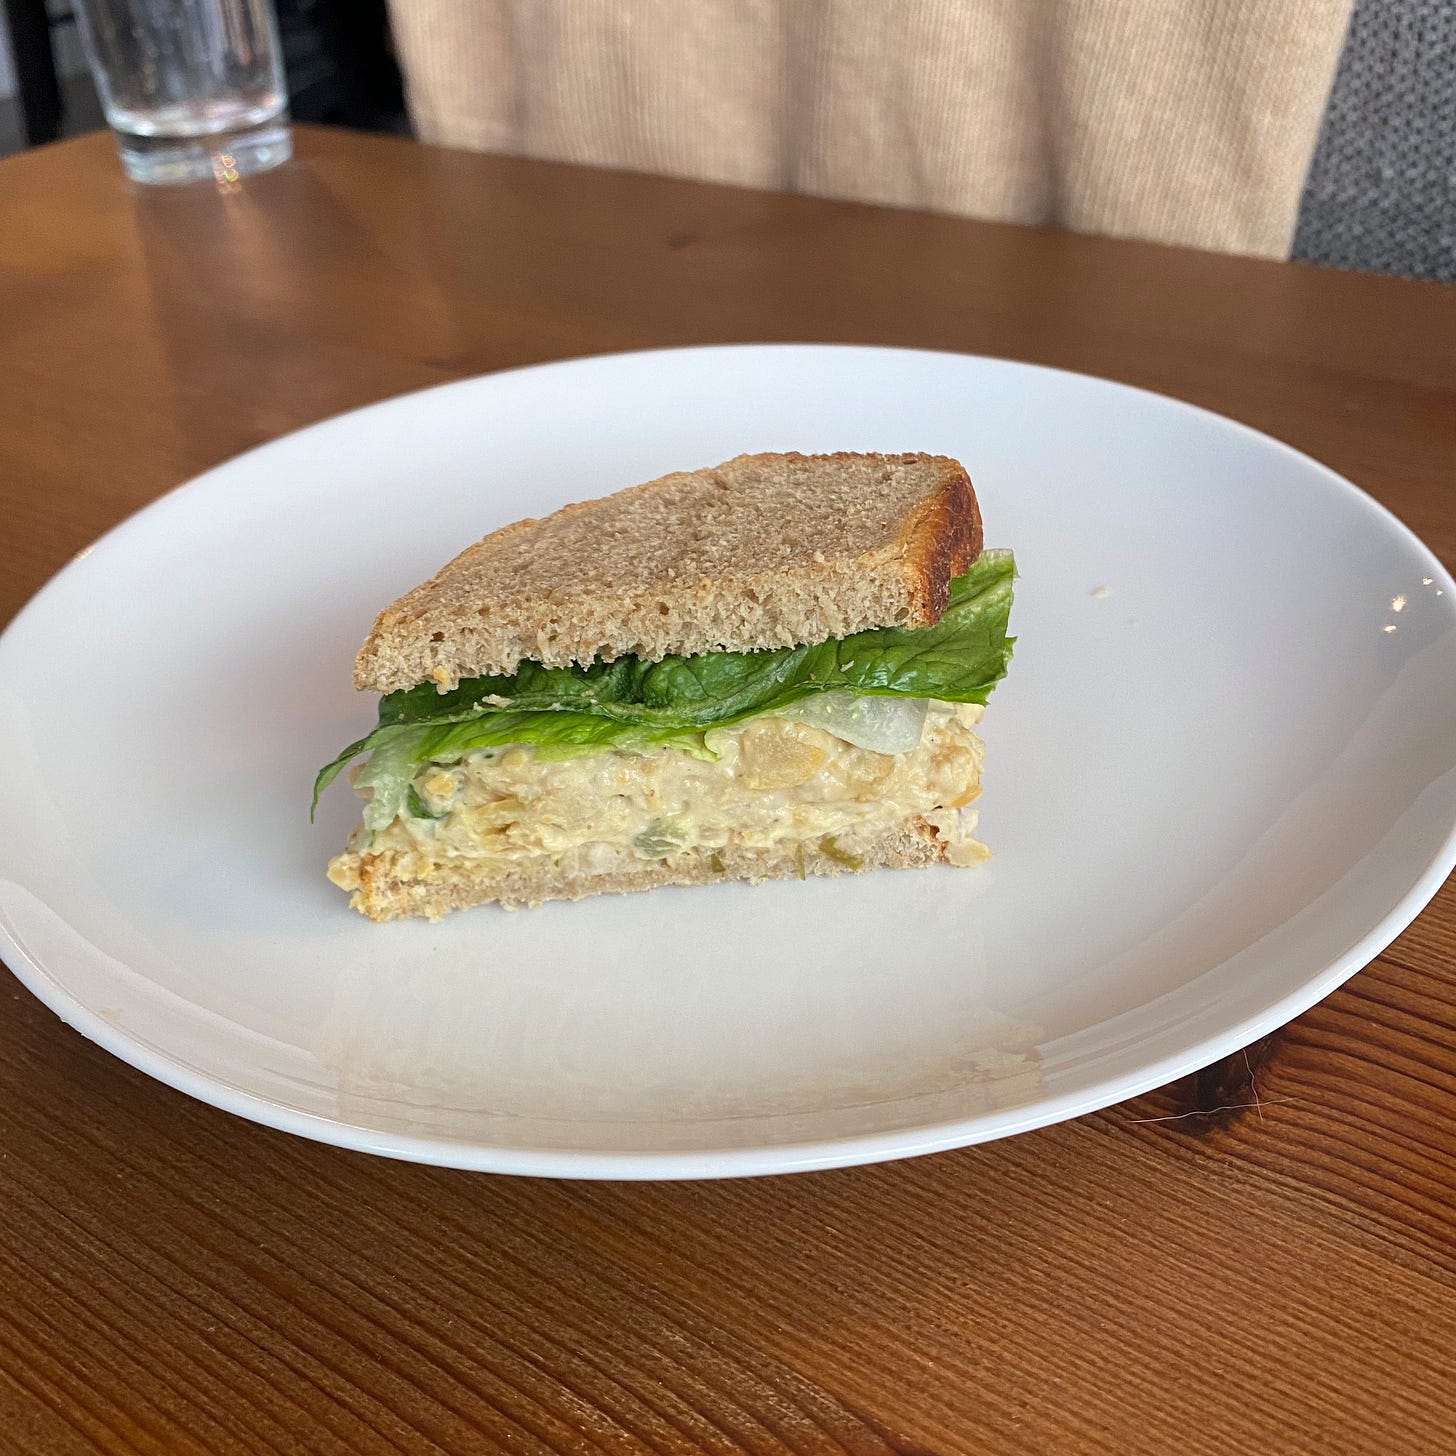 On a white plate on top of a wooden table, half of a chickpea 'tuna' salad sandwich with lettuce. The bread is light brown with a dark crust.